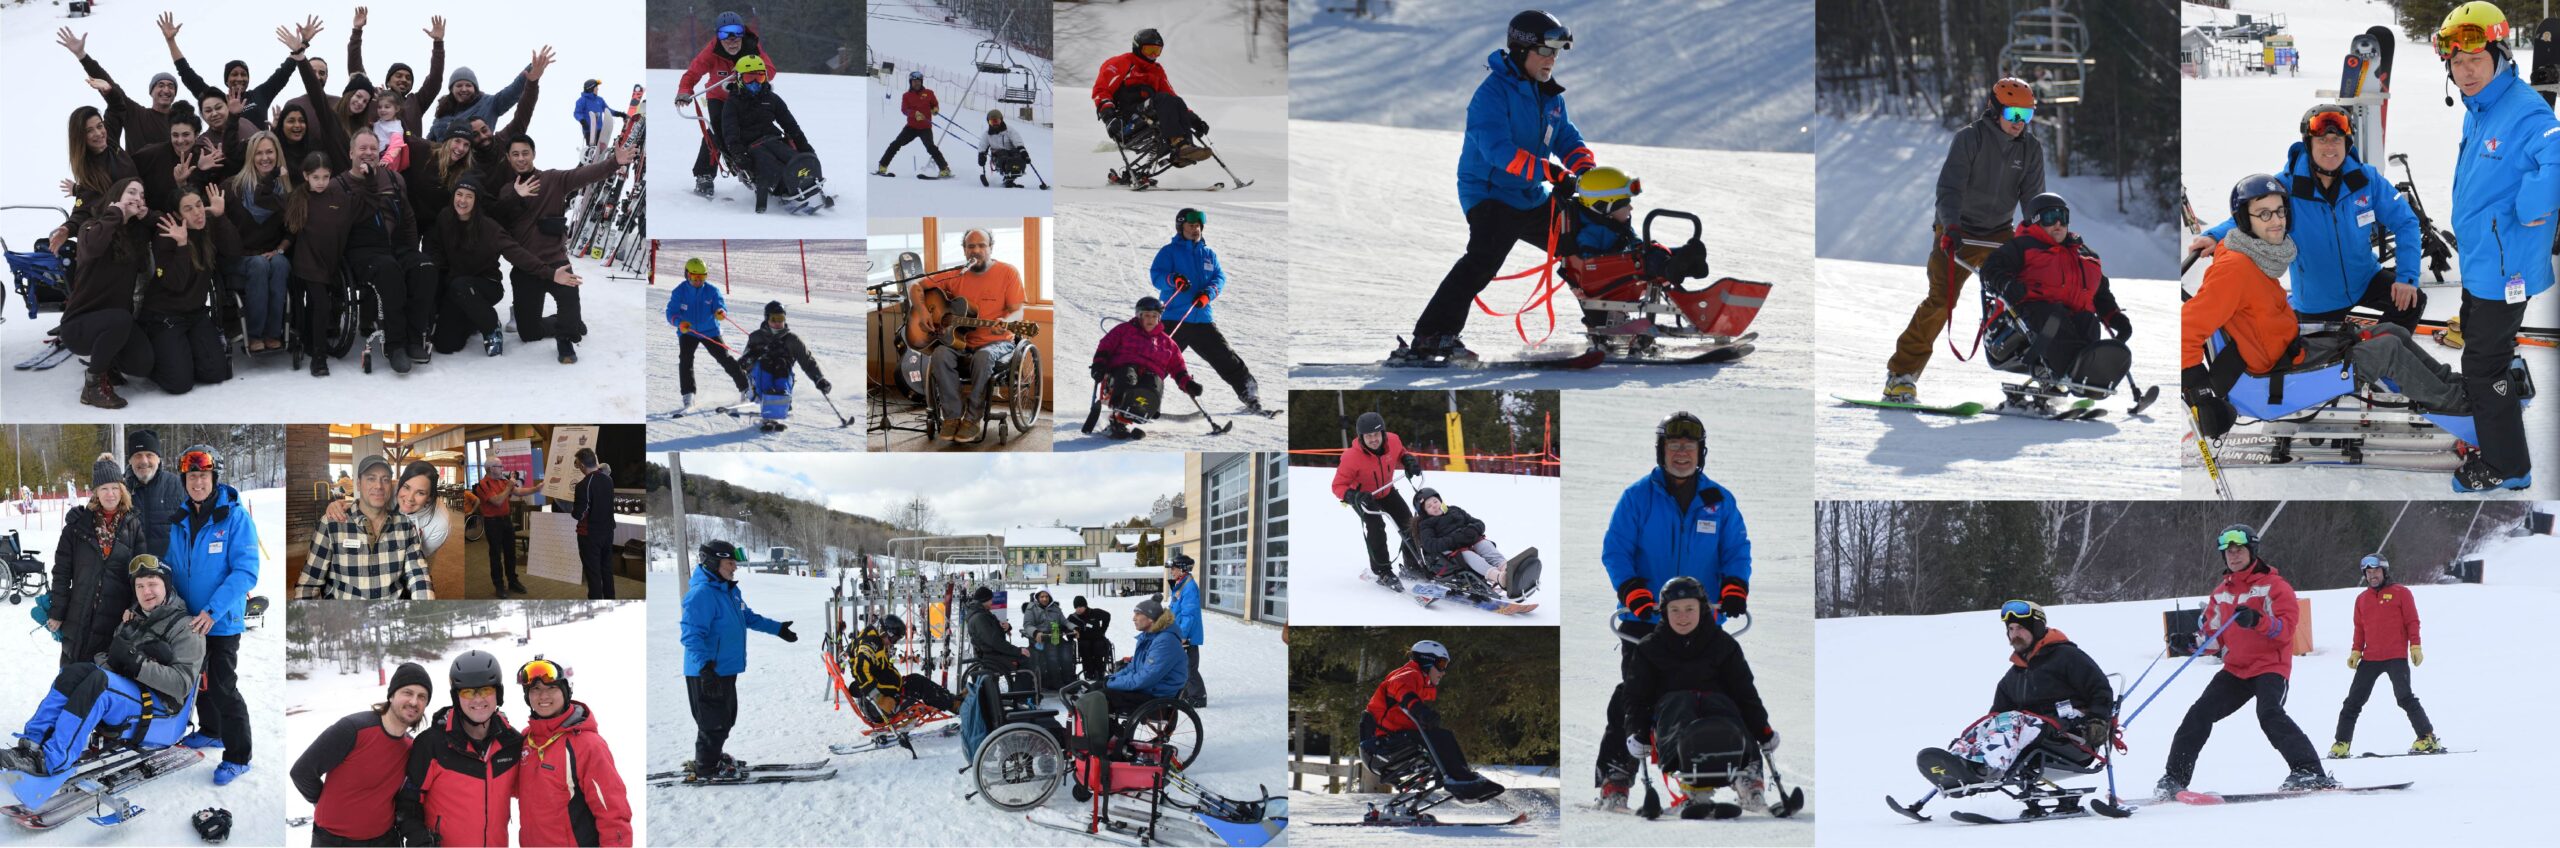 Collage of photos from the 22nd annual ski and snowboard day